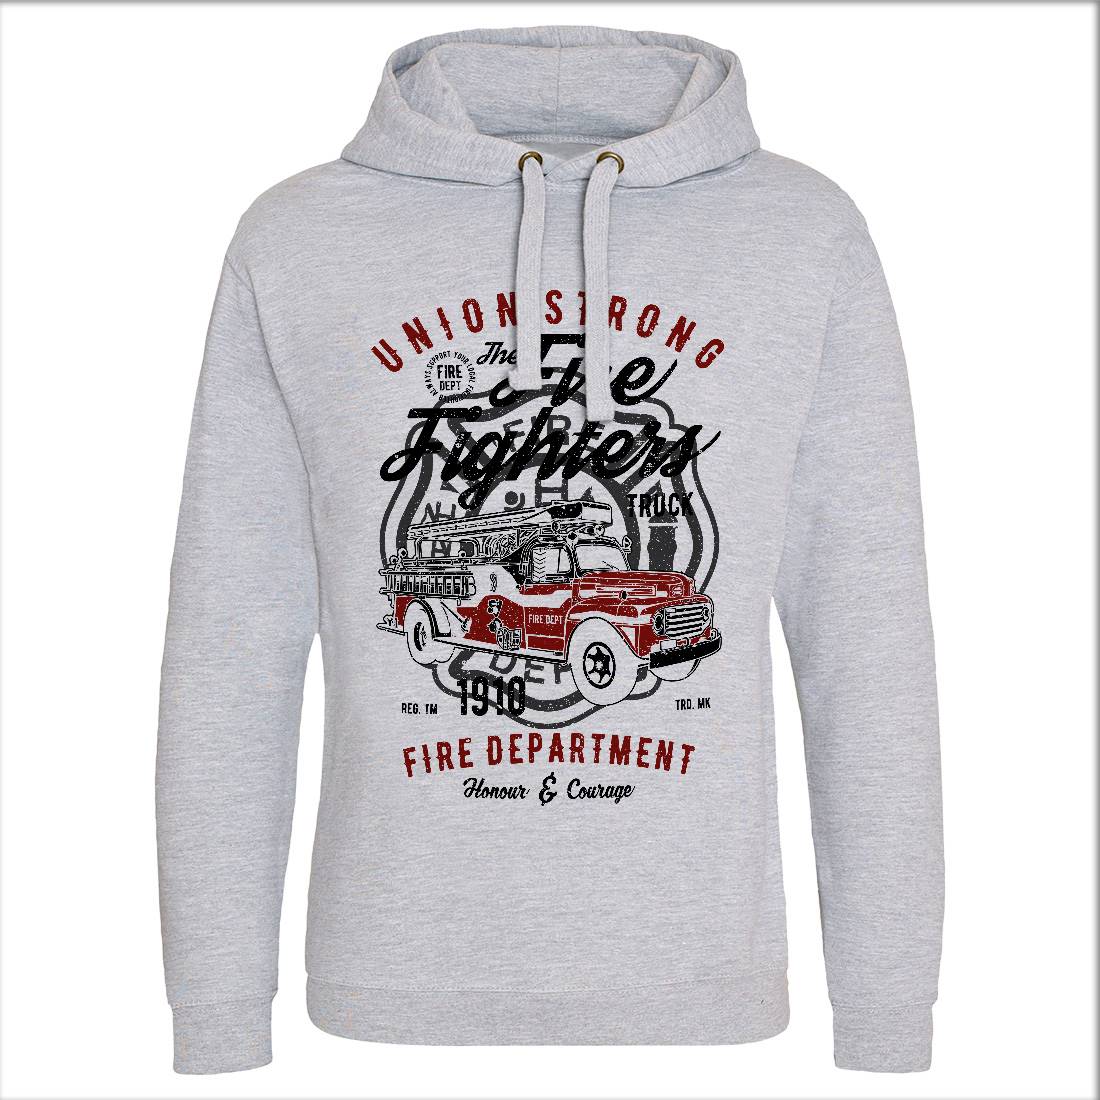 Union Strong Mens Hoodie Without Pocket Firefighters A781